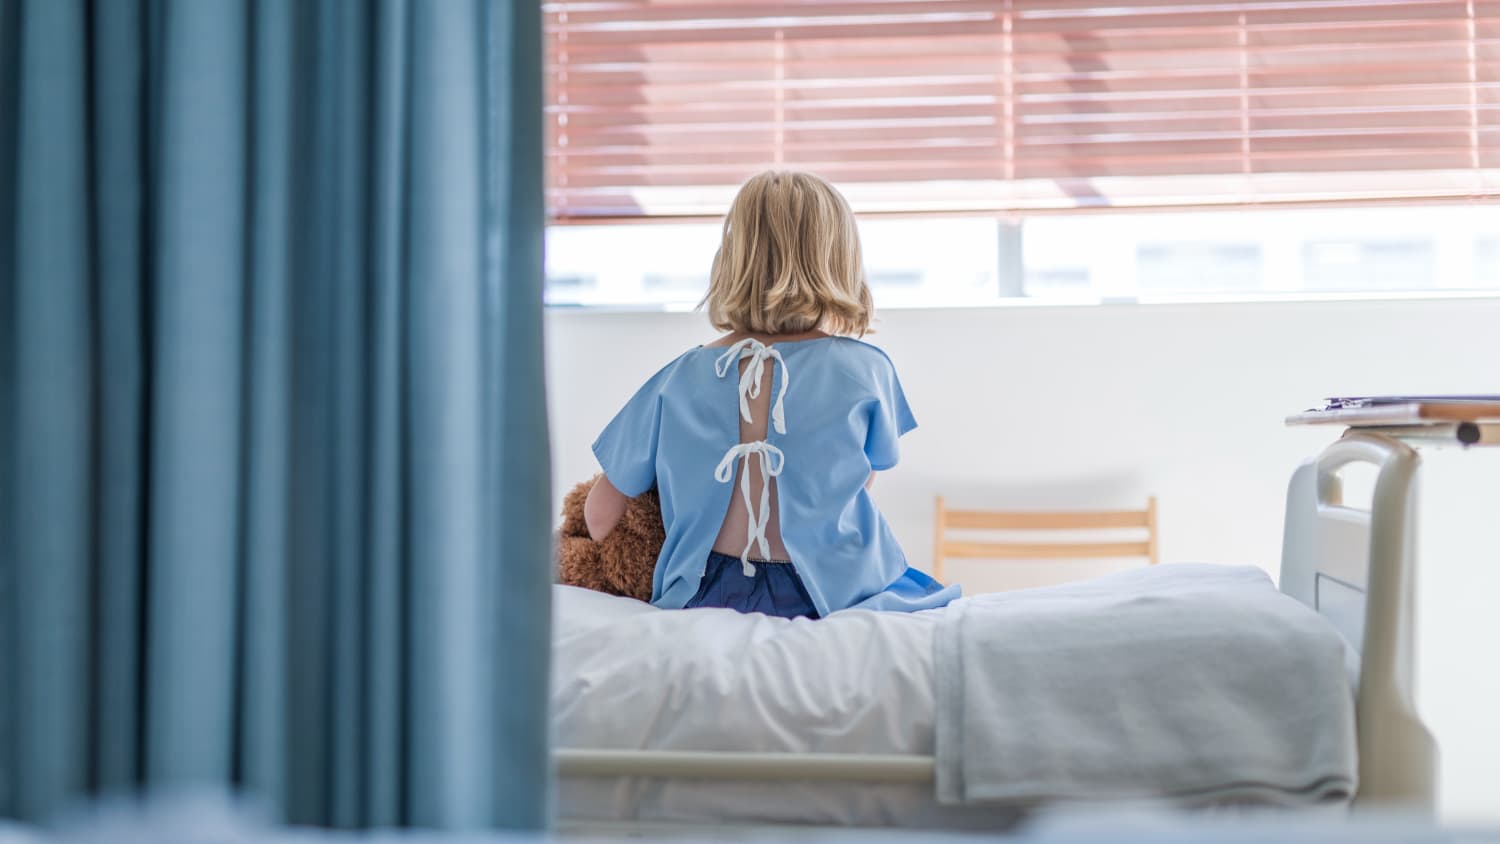 kid, possibly with hepatitis diagnosis, wearing a hospital gown on a hospital bed